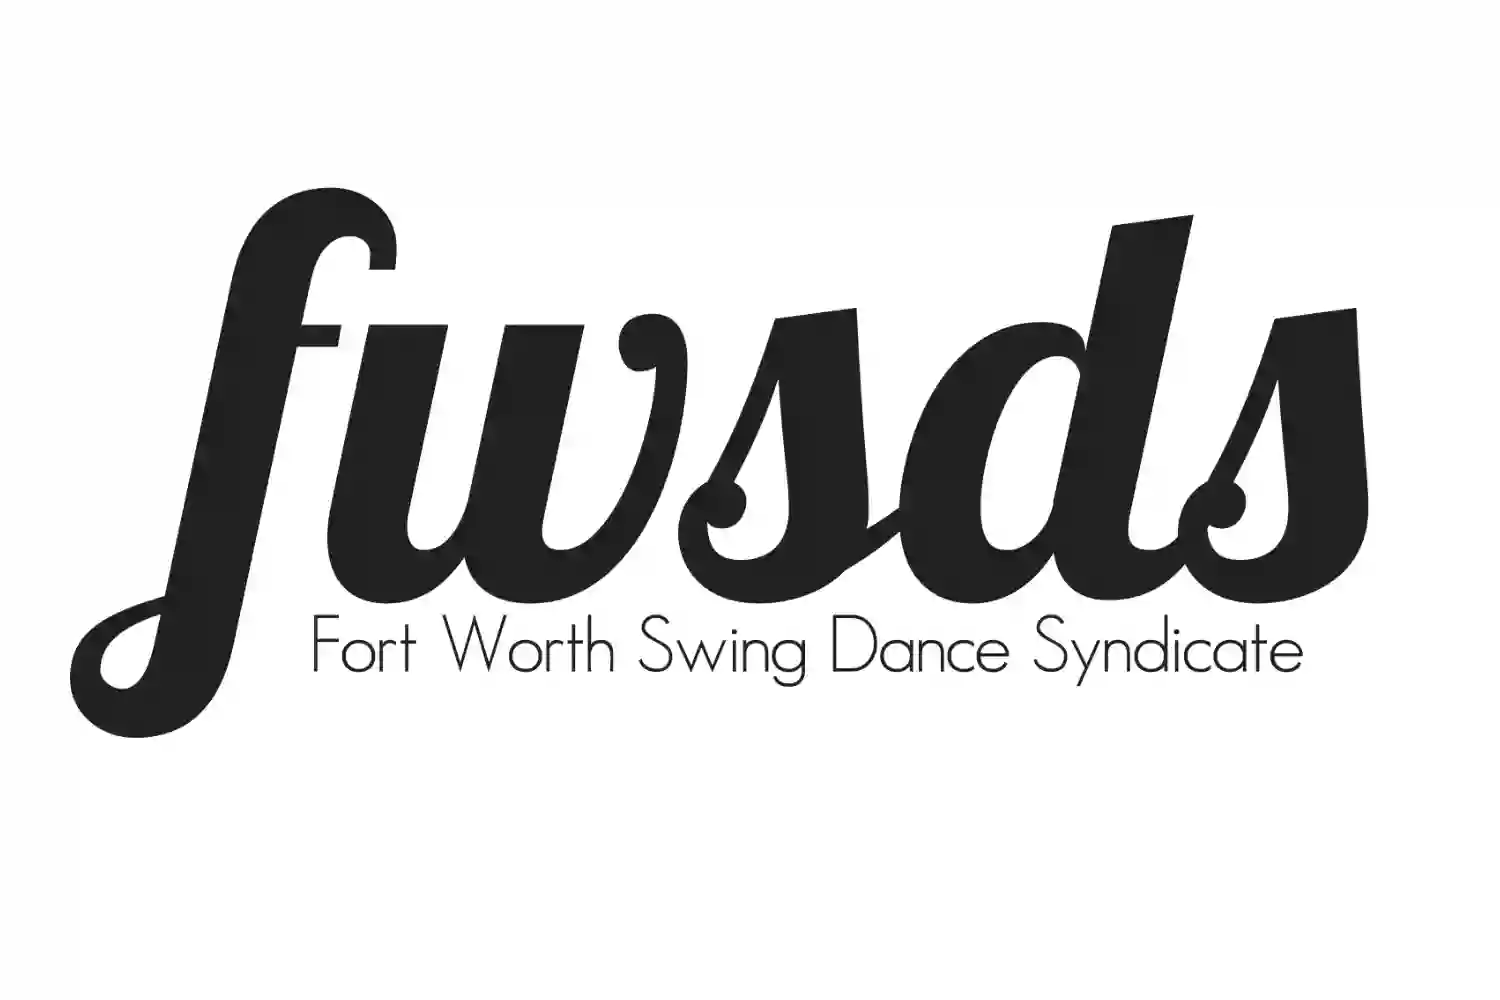 Fort Worth Swing Dance Syndicate